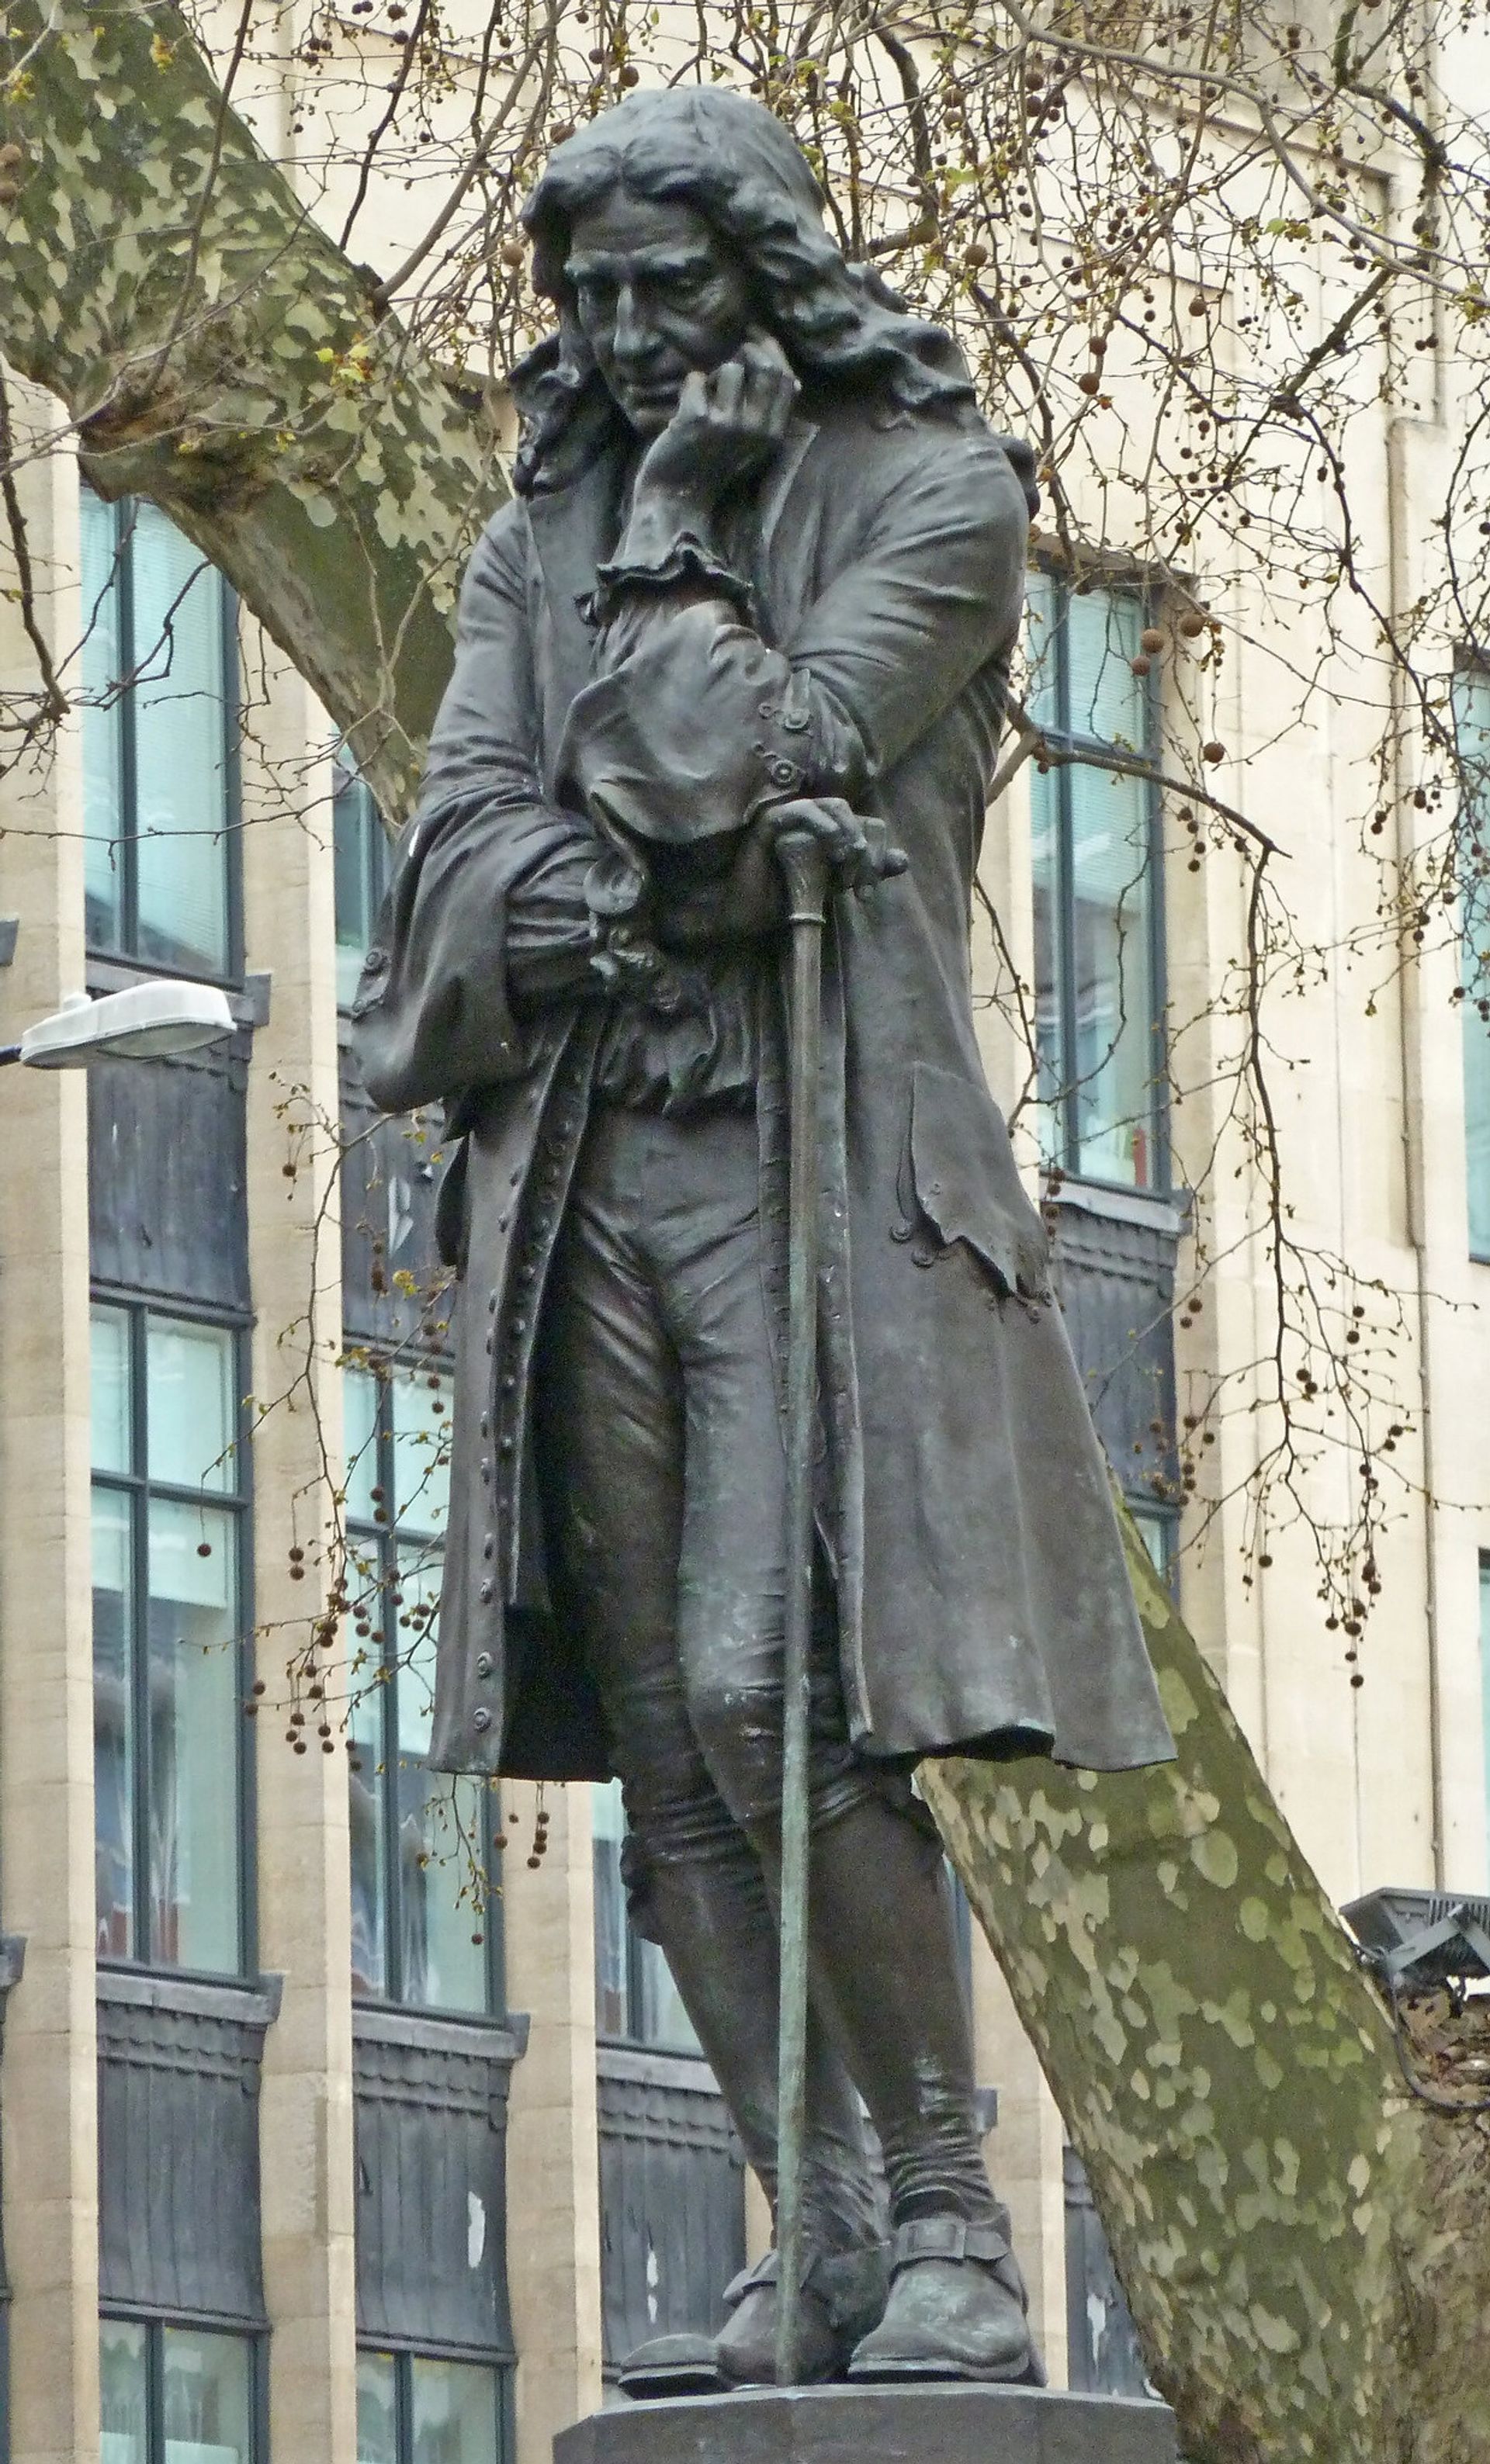 The statue of slave trader Edward Colston in Bristol was removed by anti-racism protestors 